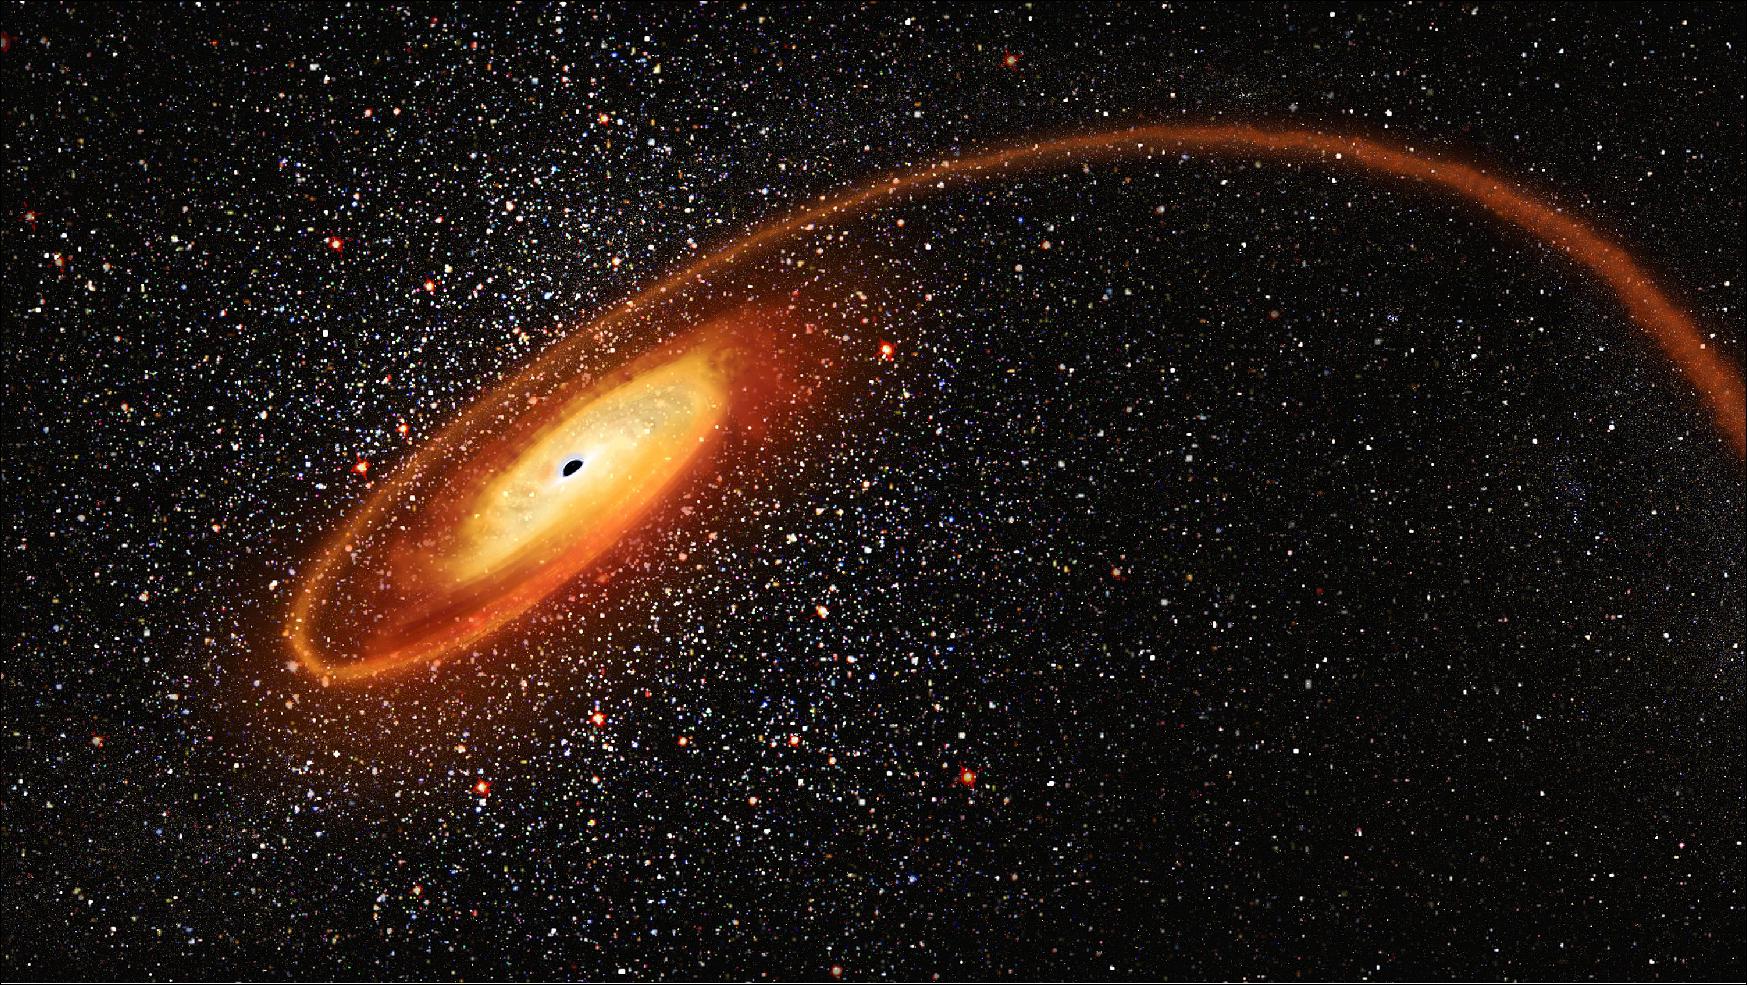 Figure 82: This illustration depicts a cosmic homicide in action. A wayward star is being shredded by the intense gravitational pull of a black hole that contains tens of thousands of solar masses. The stellar remains are forming an accretion disk around the black hole. Flares of X-ray light from the super-heated gas disk alerted astronomers to the black hole's location; otherwise it lurked unknown in the dark. The elusive object is classified as an intermediate mass black hole (IMBH), as it is much less massive than the monster black holes that dwell in the centers of galaxies. Therefore, IMBHs are mostly quiescent because they do not pull in as much material, and are hard to find. Hubble observations provide evidence that the IMBH dwells inside a dense star cluster. The cluster itself may be the stripped-down core of a dwarf galaxy [image credit: NASA, ESA and D. Player (STScI)]